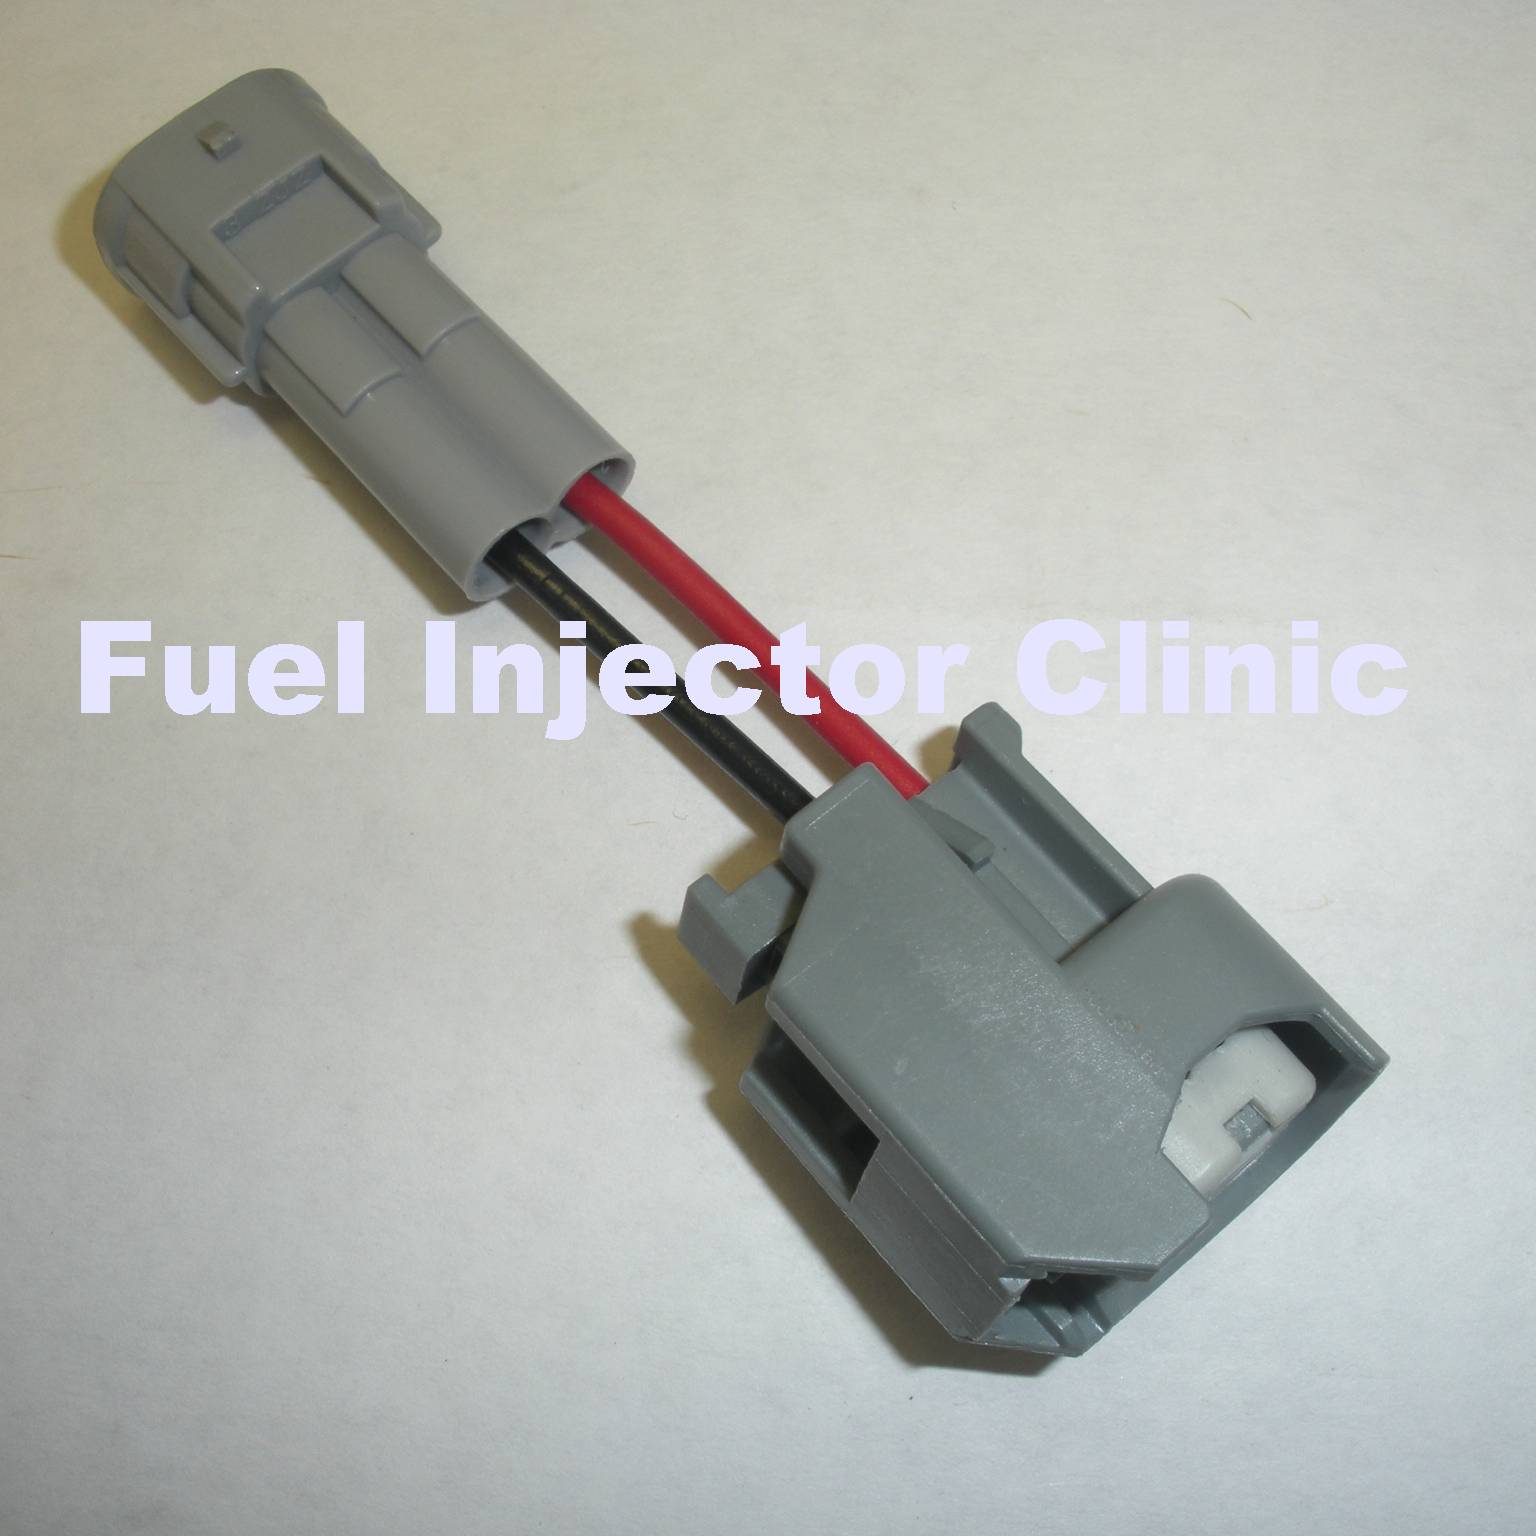 Fuel Injector Clinic Jetronic/EV1 to Denso plug adaptors - Click Image to Close